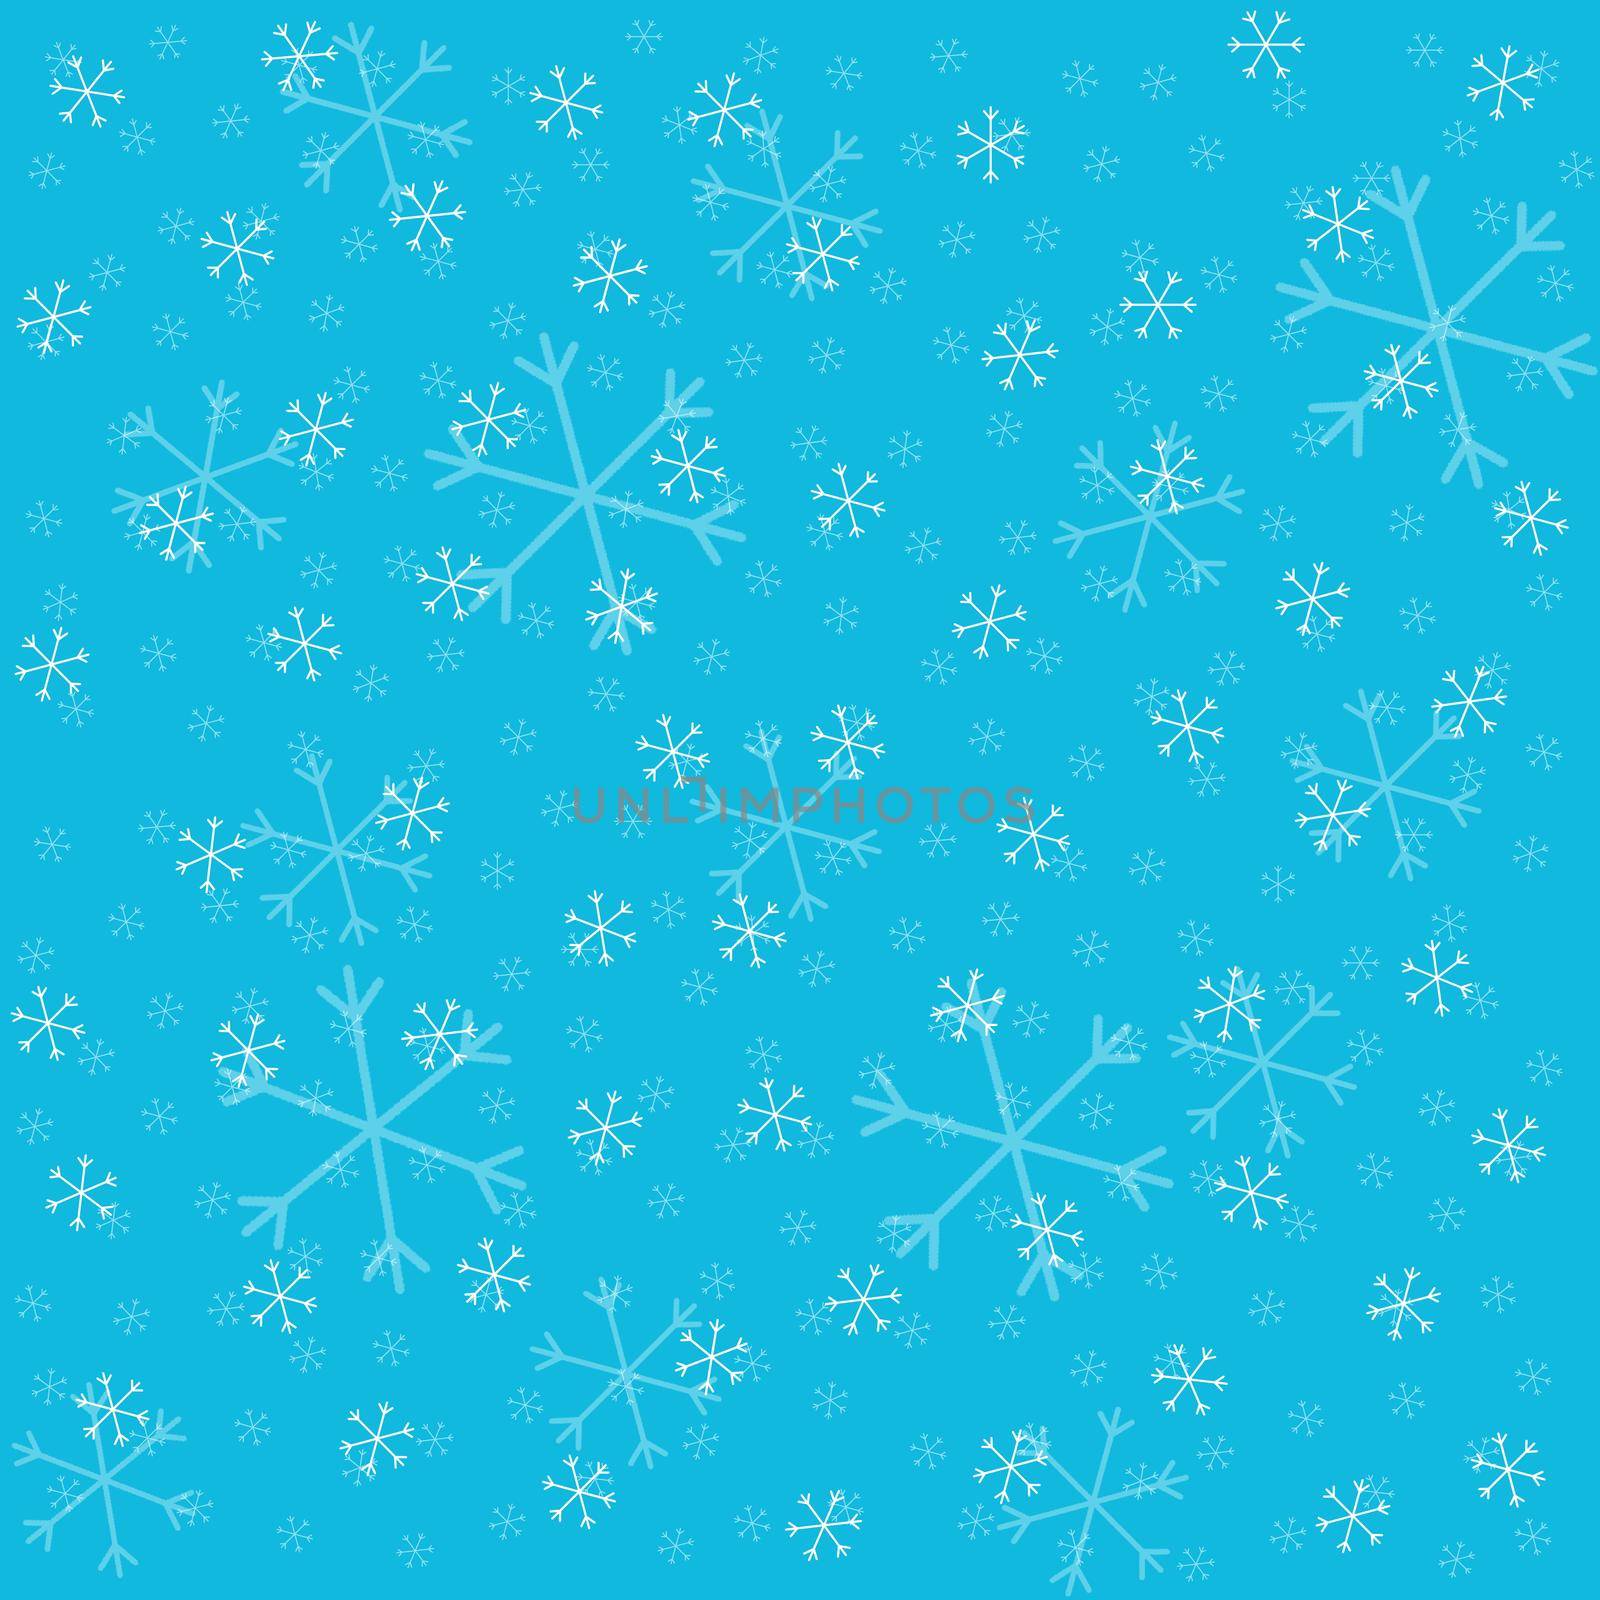 Seamless Christmas pattern doodle with hand random drawn snowflakes.Wrapping paper for presents, funny textile fabric print, design,decor, food wrap, backgrounds. new year.Raster copy.Sky blue, white by Angelsmoon